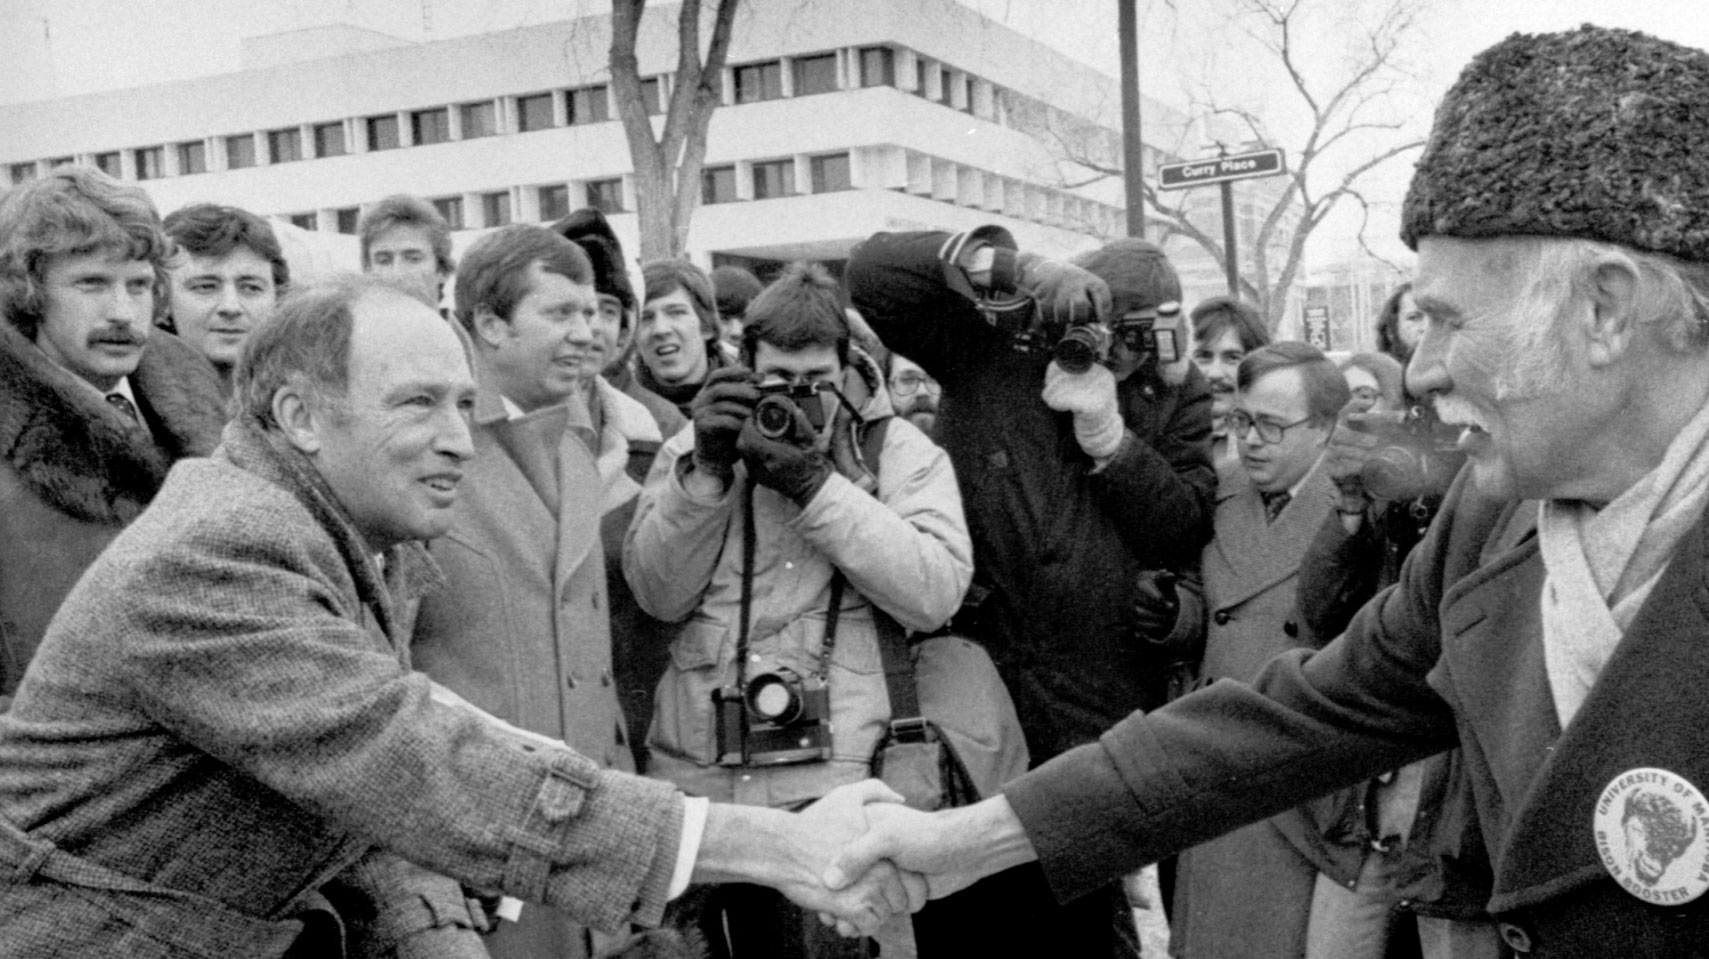 Prime Minister Justin Trudeau’s father, Pierre Elliott Trudeau, also visited the University of Manitoba 38 years ago. Trudeau shakes hands with former U of M President Ralph Campbell in 1980, while Trudeau was campaigning in the federal election.